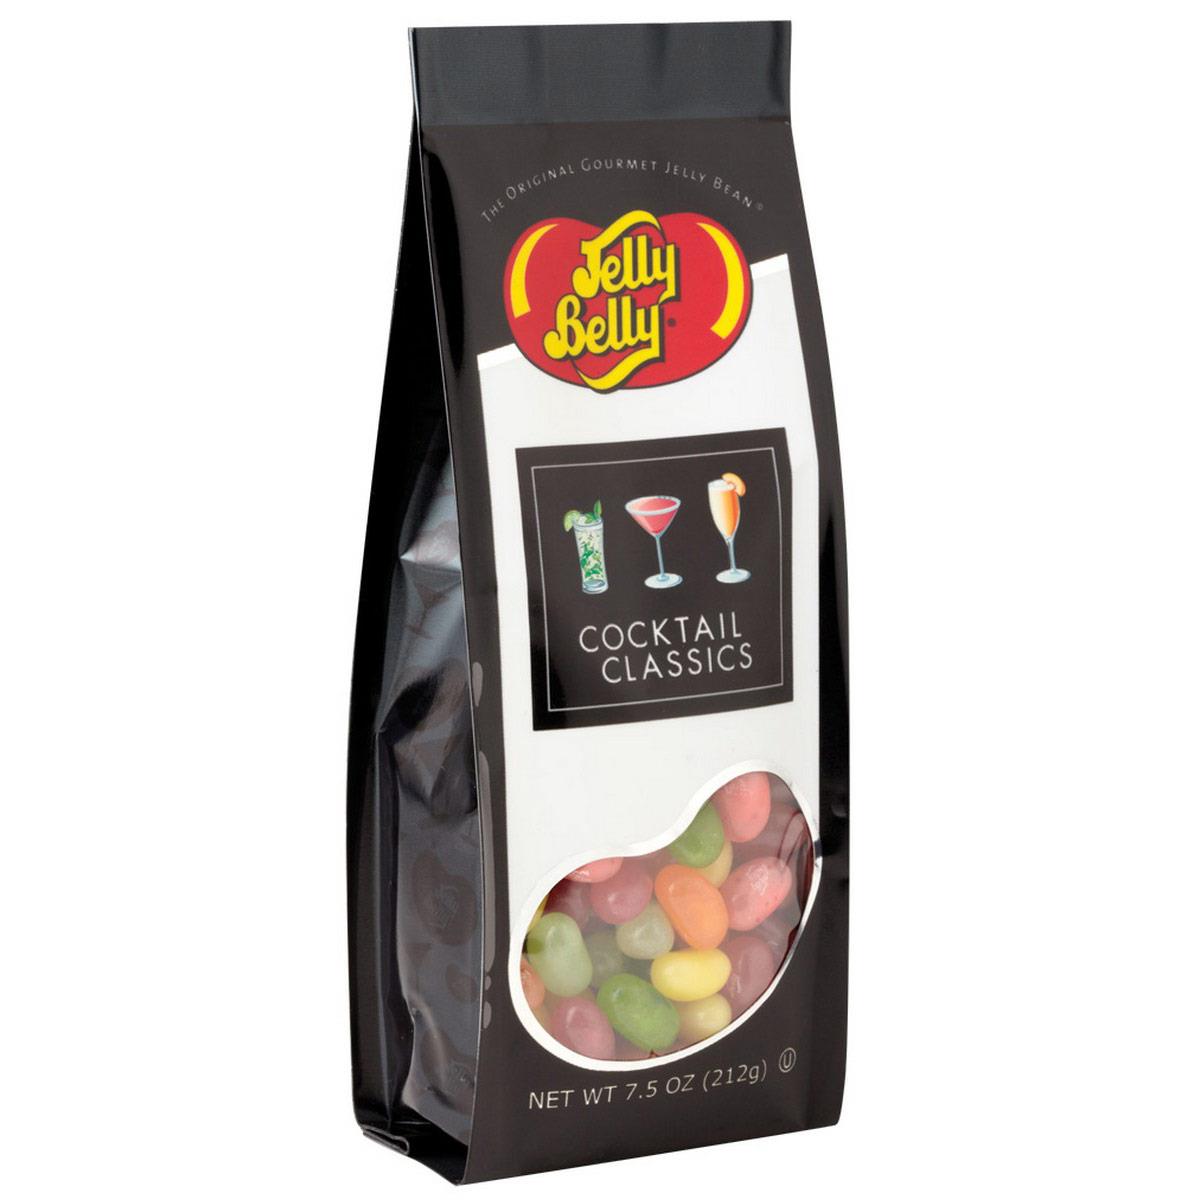 Jelly Belly Cocktail Classics Jelly Beans - 7.5oz